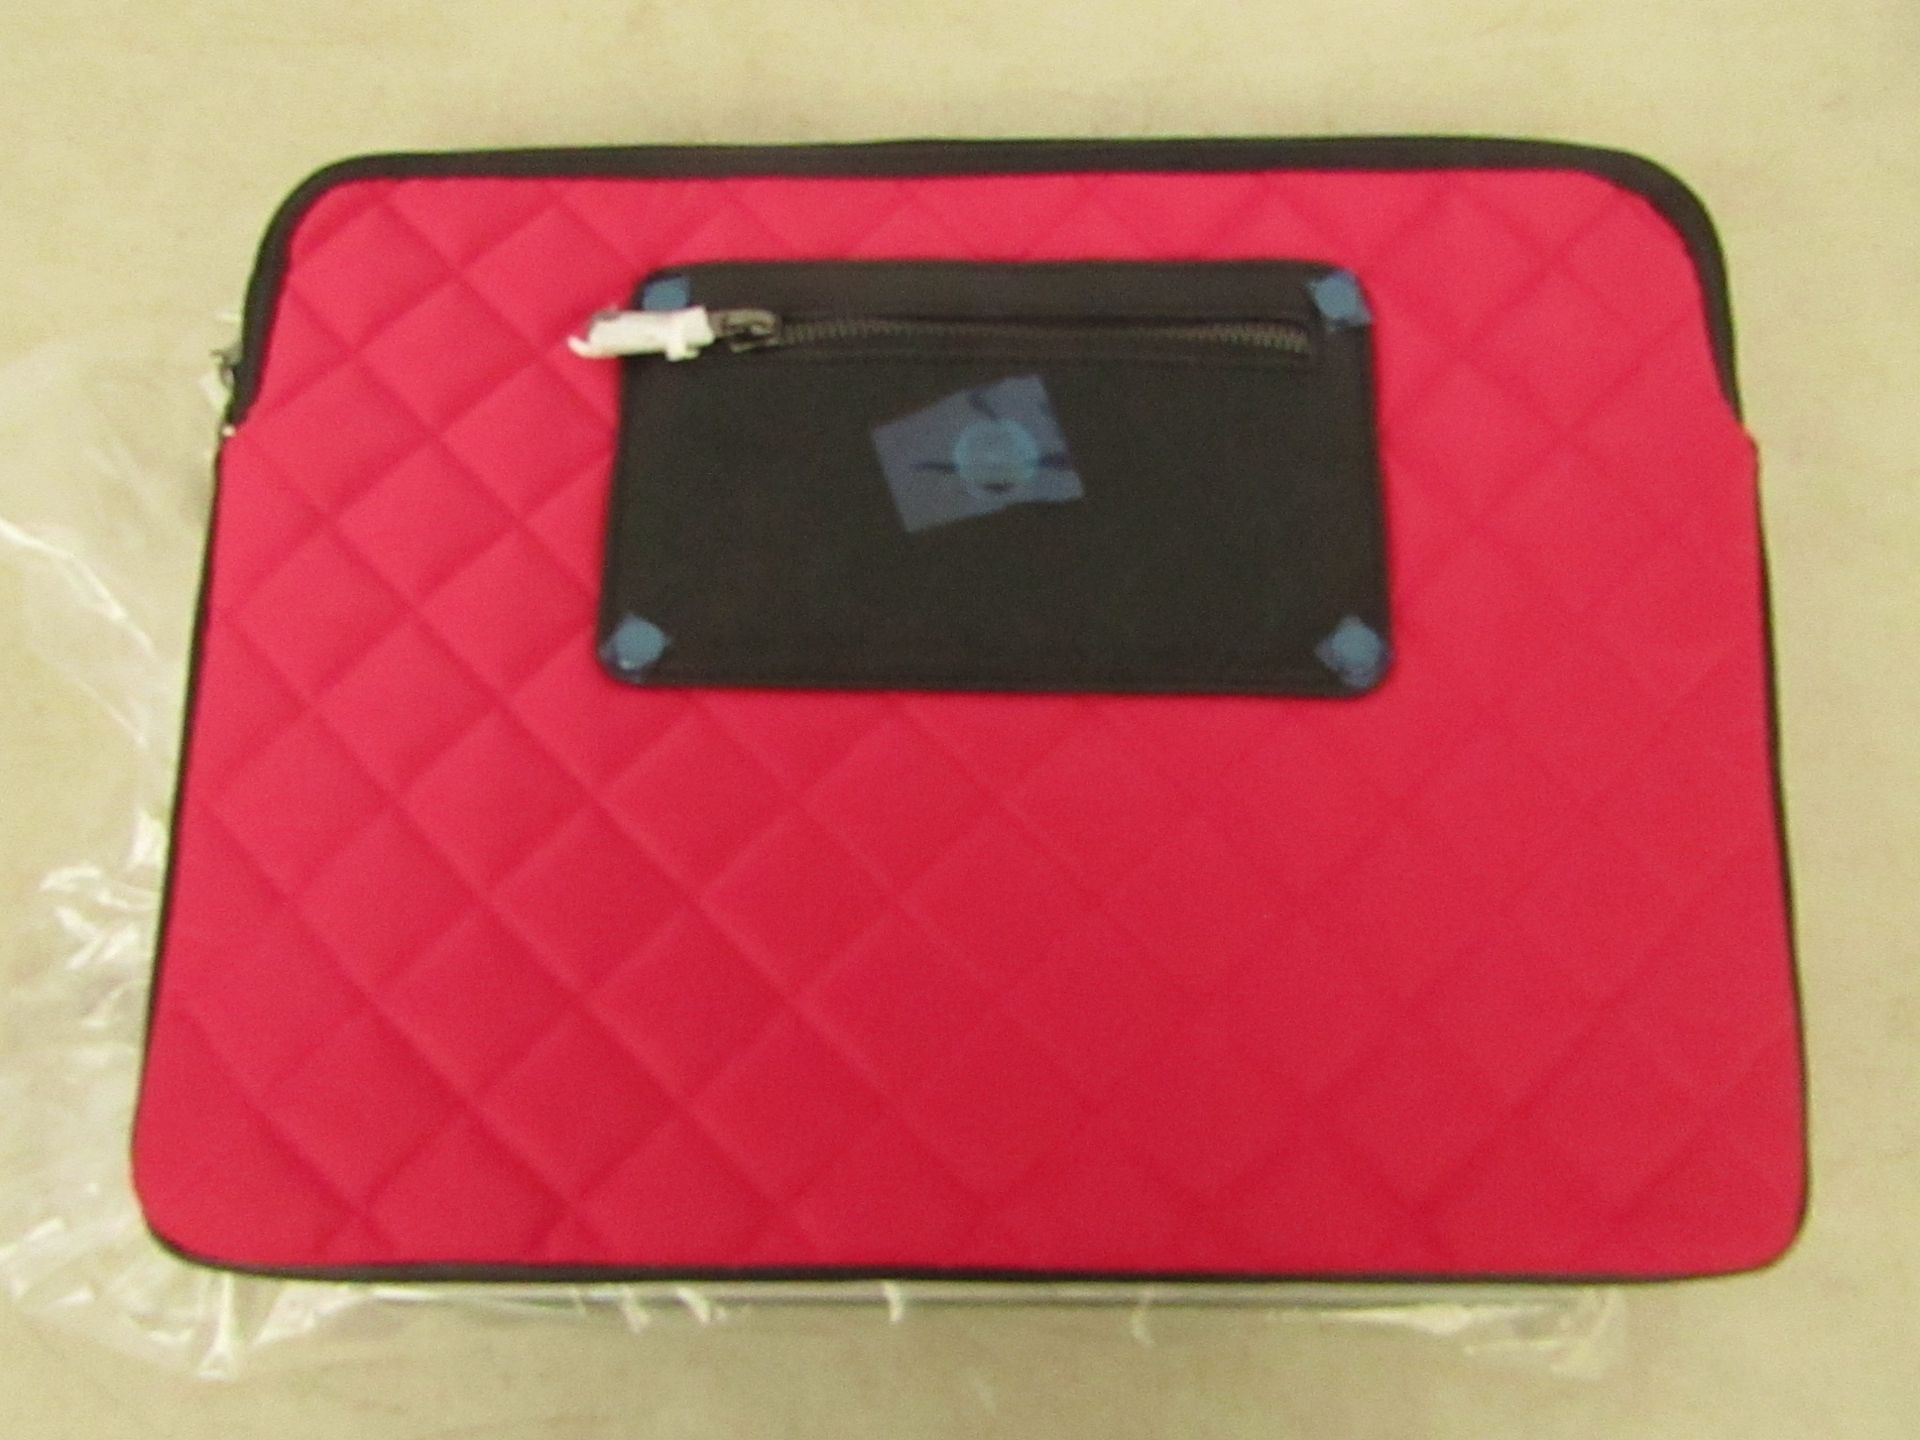 10x Knomo pink laptop sleeve for 13" MacBook Pro, brand new and boxed/packaged. Each RRP £49.00